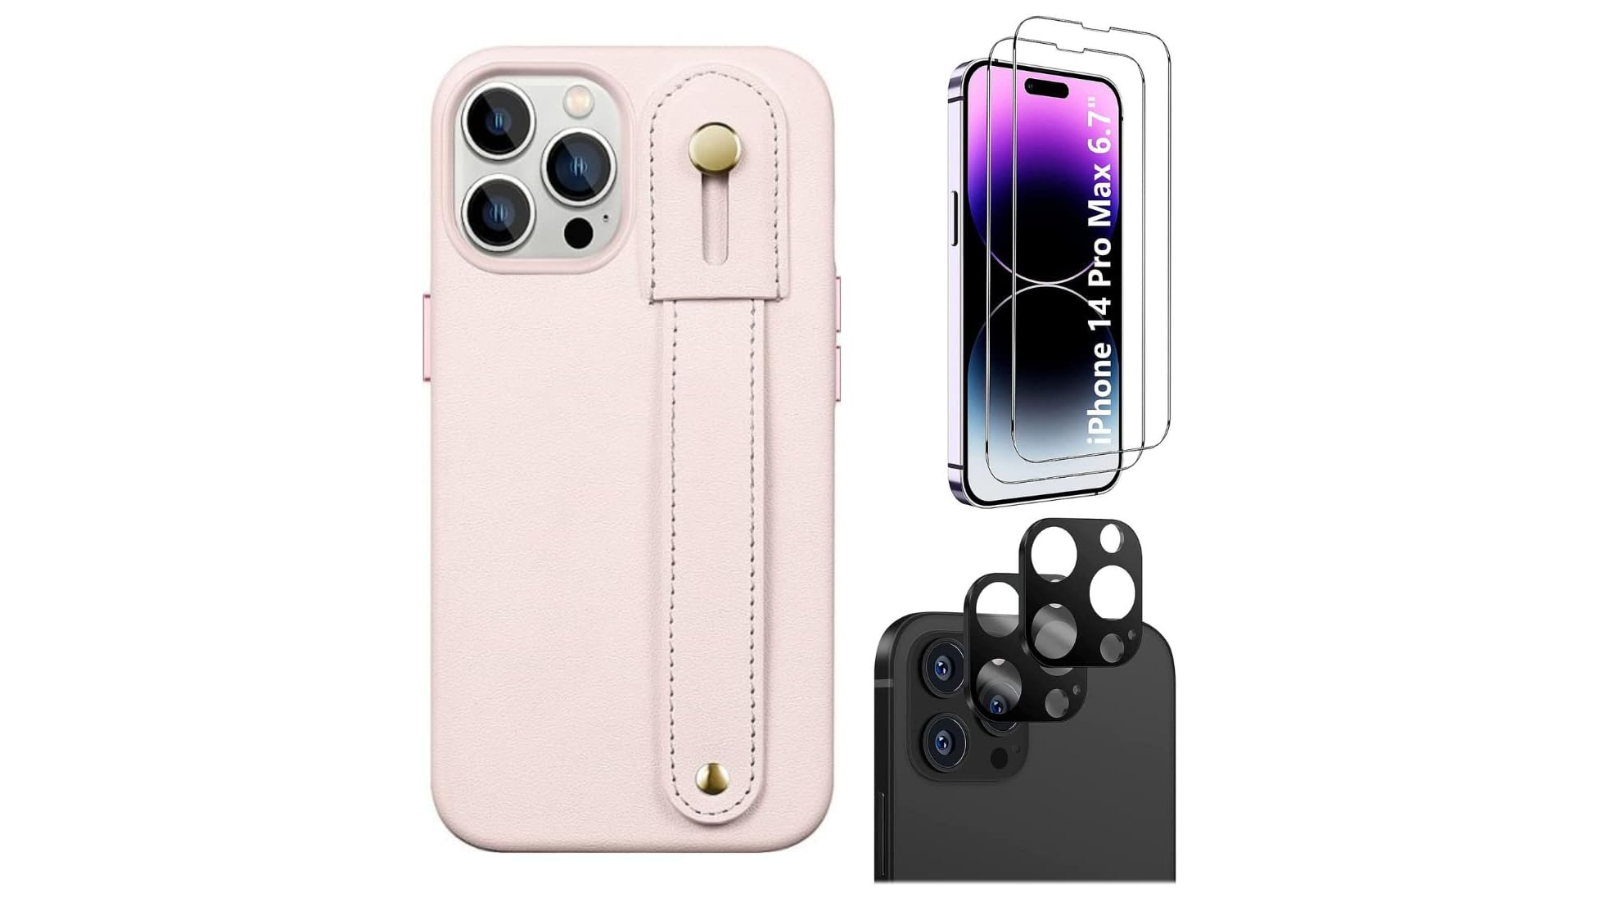 SaharaCase iPhone 14 Pro Max 6.7-inch Protection Kit Bundle - FingerGrip Series Case with Tempered Glass Screen and Camera Protector (Light Pink)